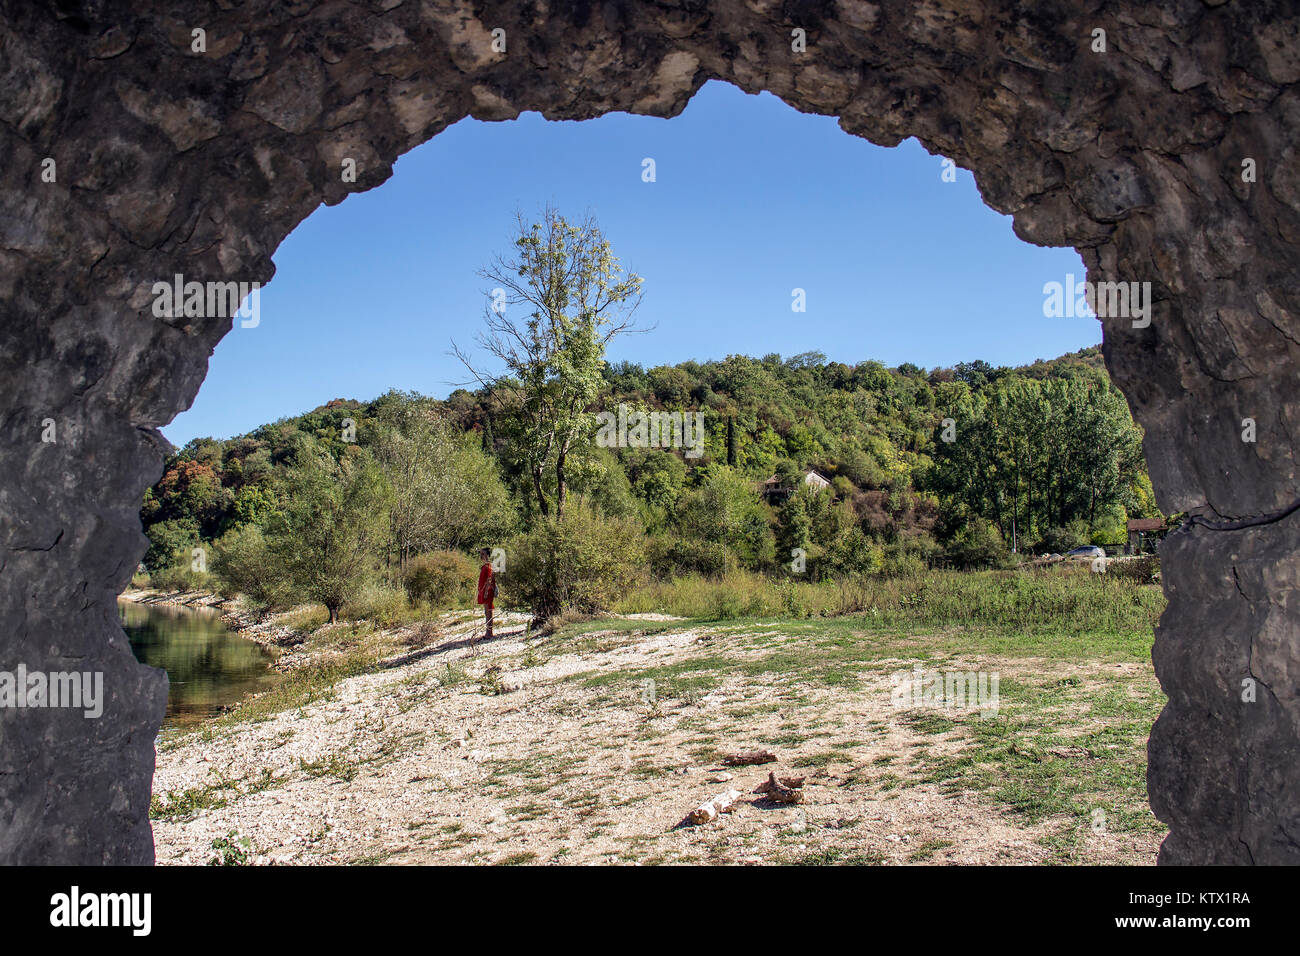 Rijeka Crnojevica, Montenegro - View through the arch of an old stone bridge of a woman observing the river bank Stock Photo